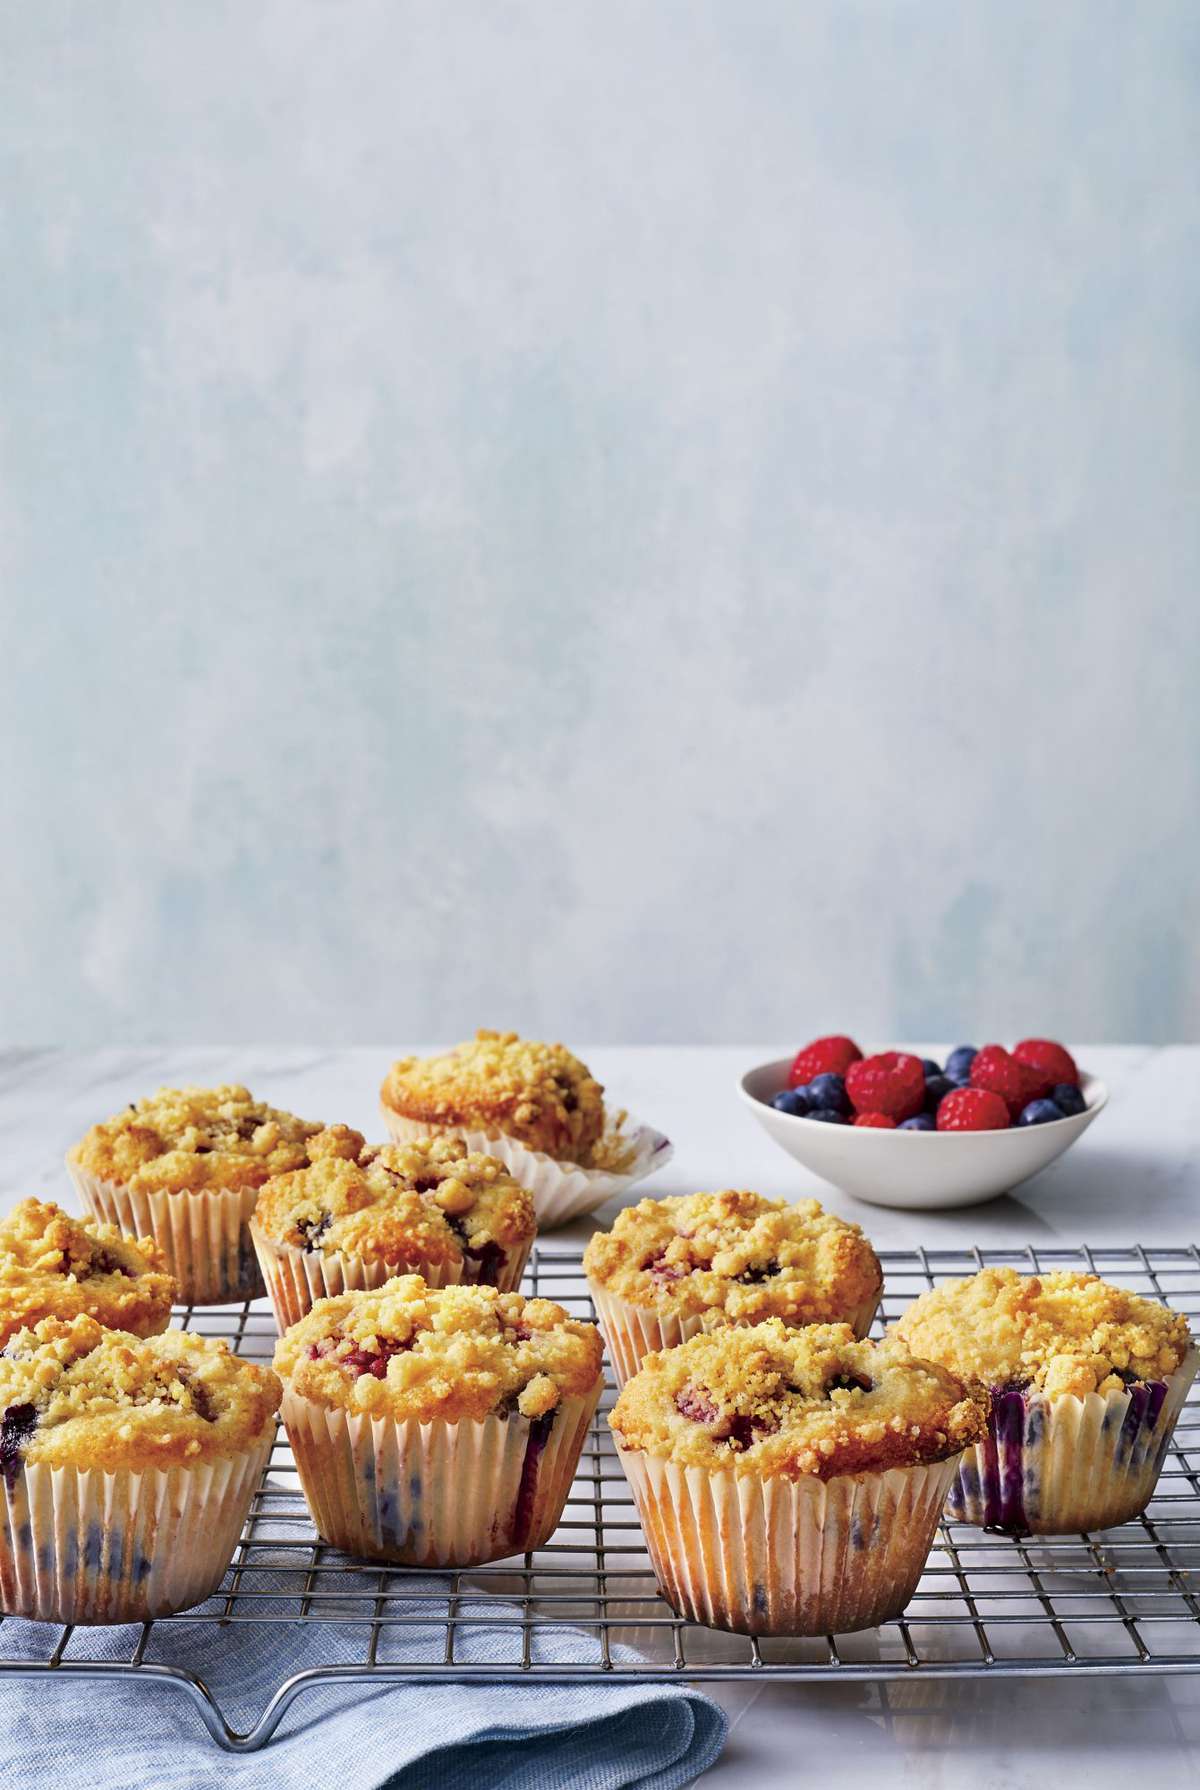 Any-Berry Muffins with Cornmeal Streusel